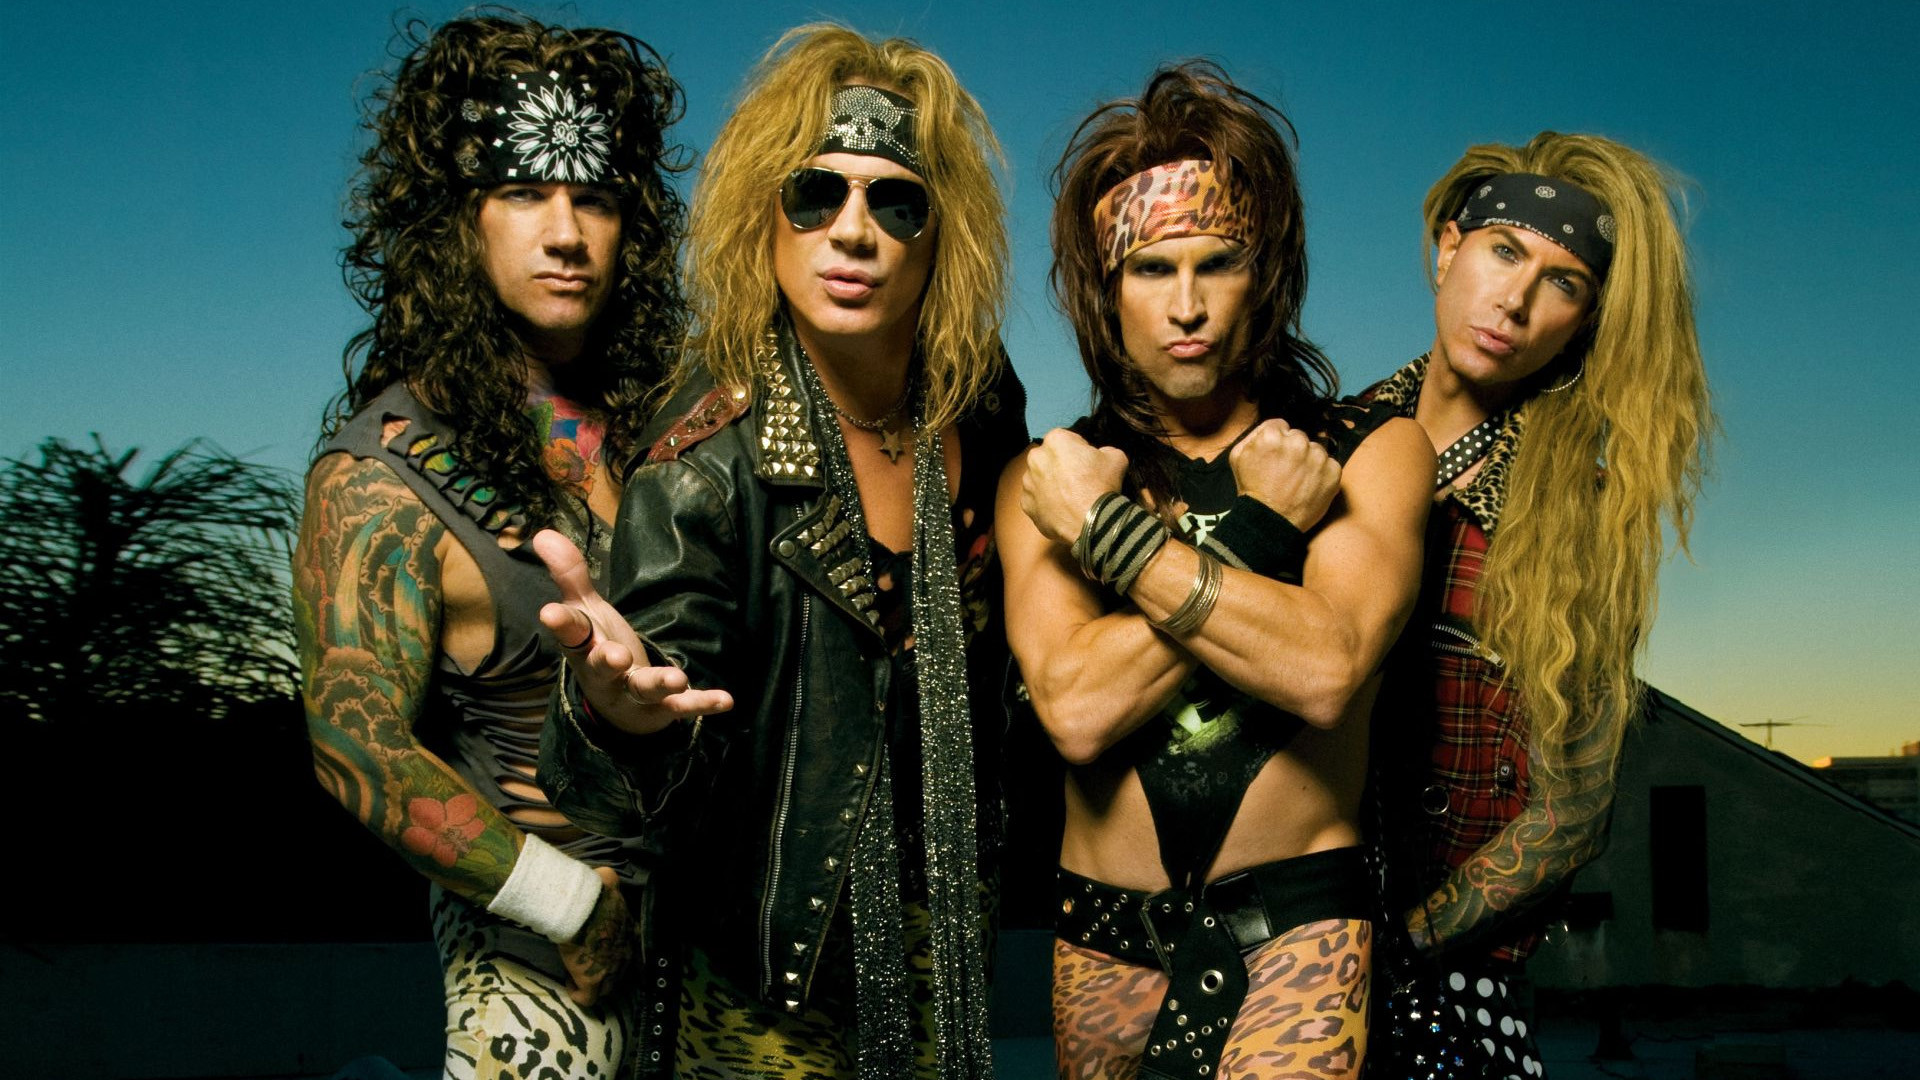 1920x1080 Steel Panther: 1/2 Spinal Tap, 1/2 Motley Crue – All Rock!